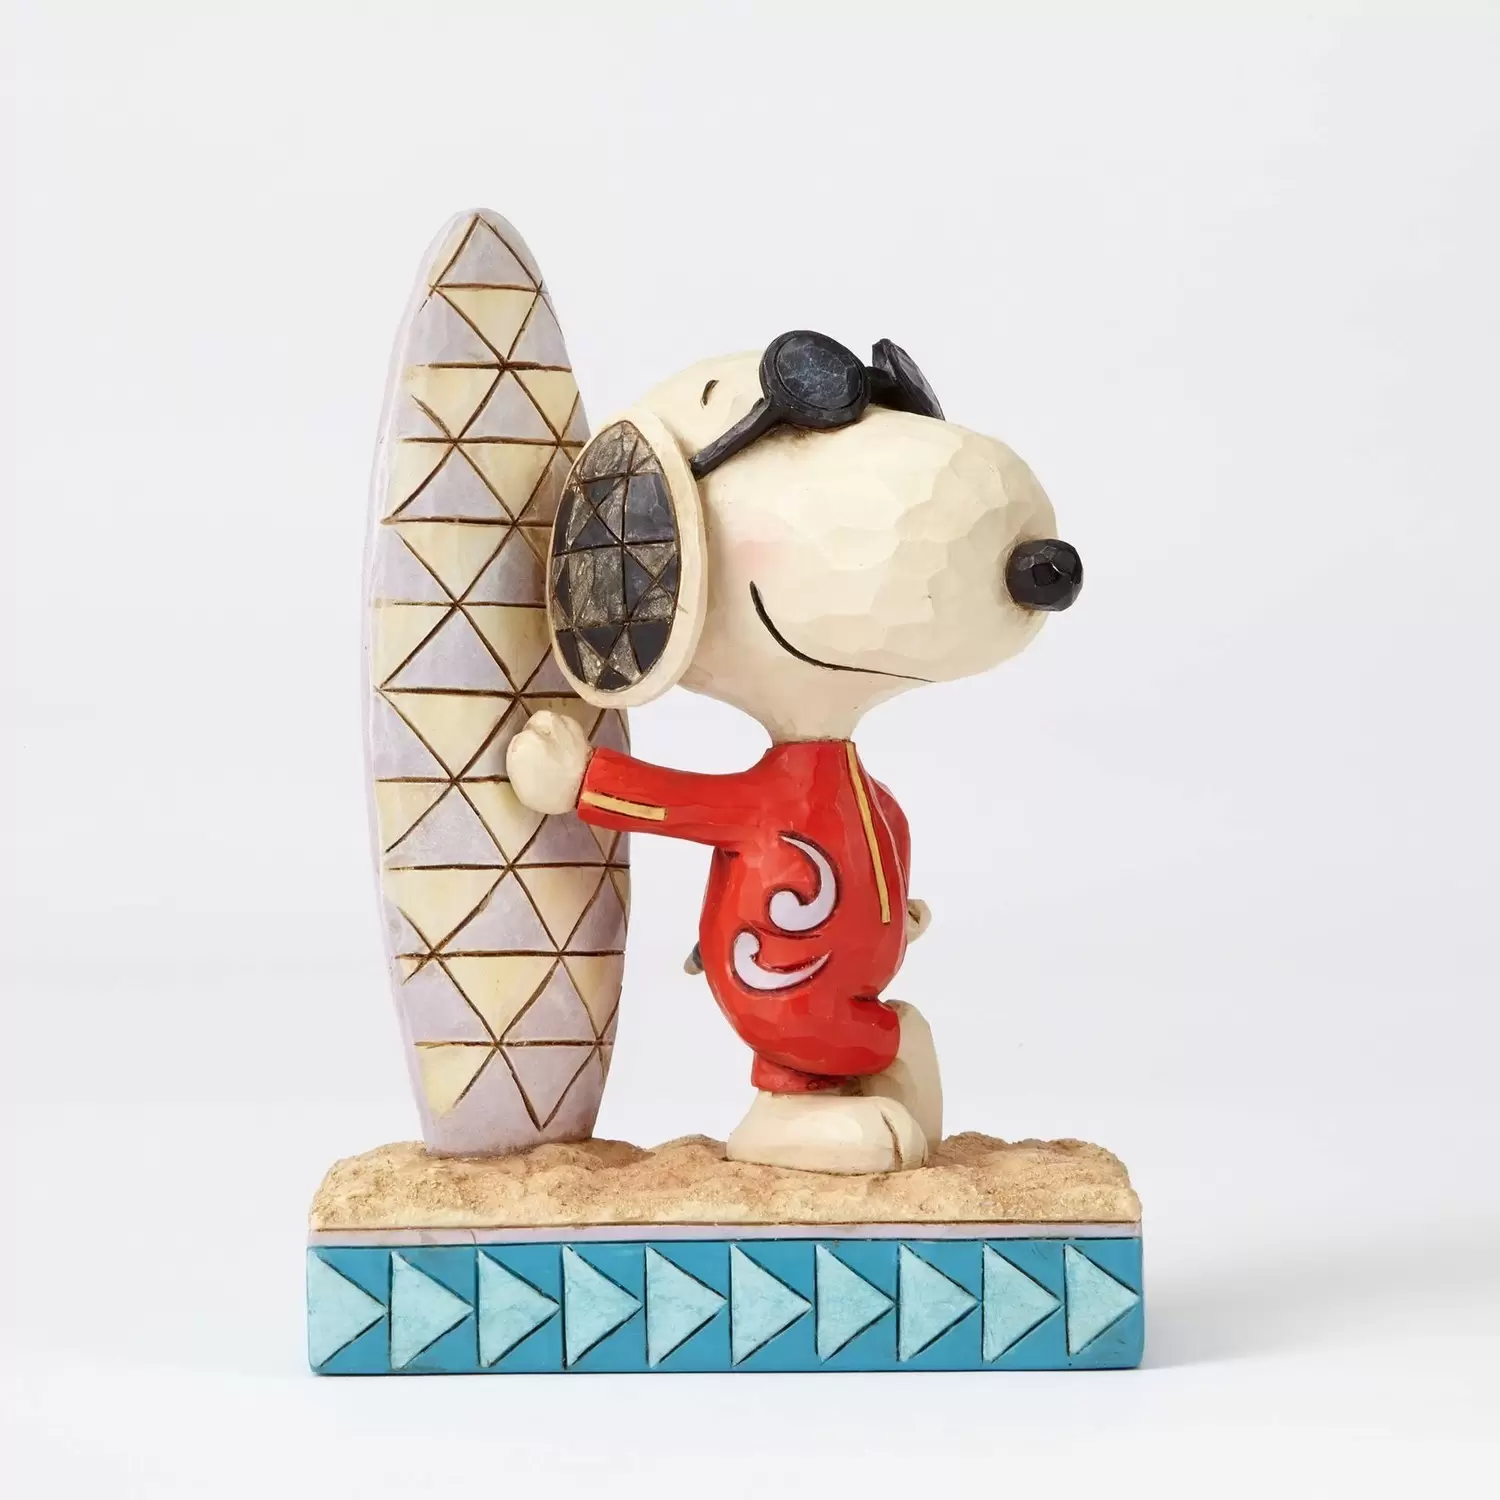 Peanuts - Jim Shore - Surfs Up - Joe Cool Snoopy with Surf Board